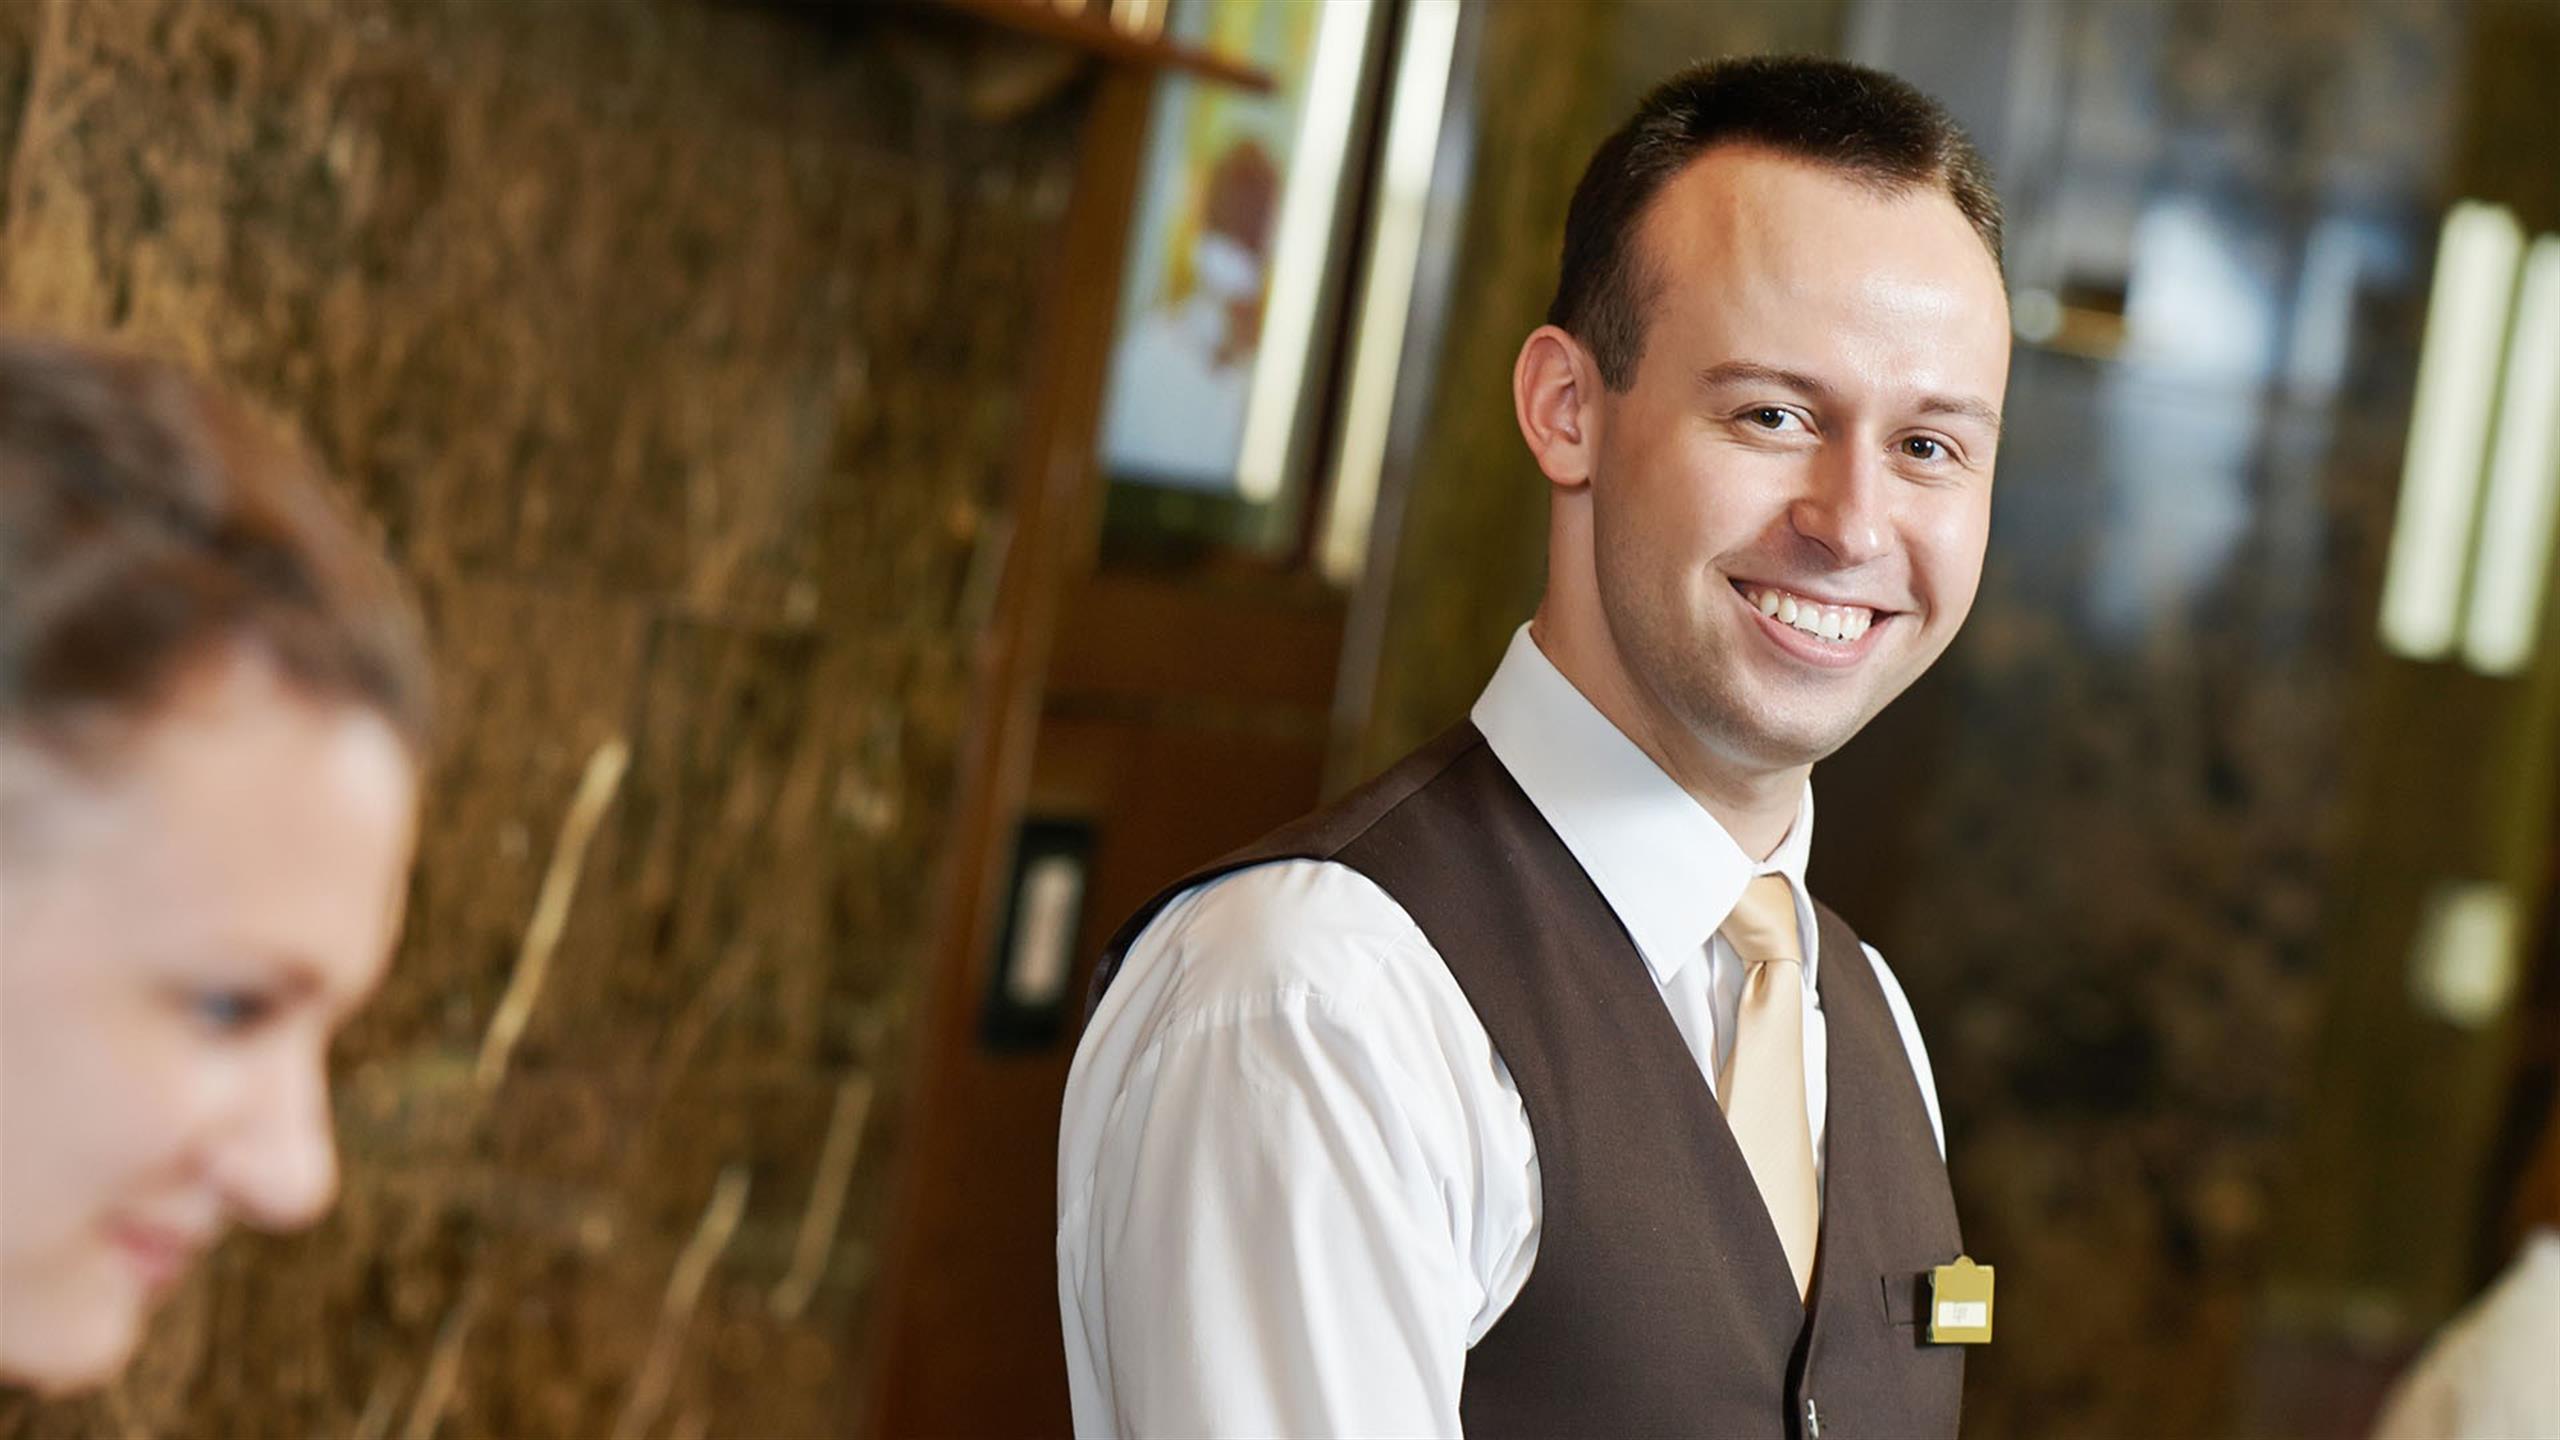 Smiling man at the reception desk